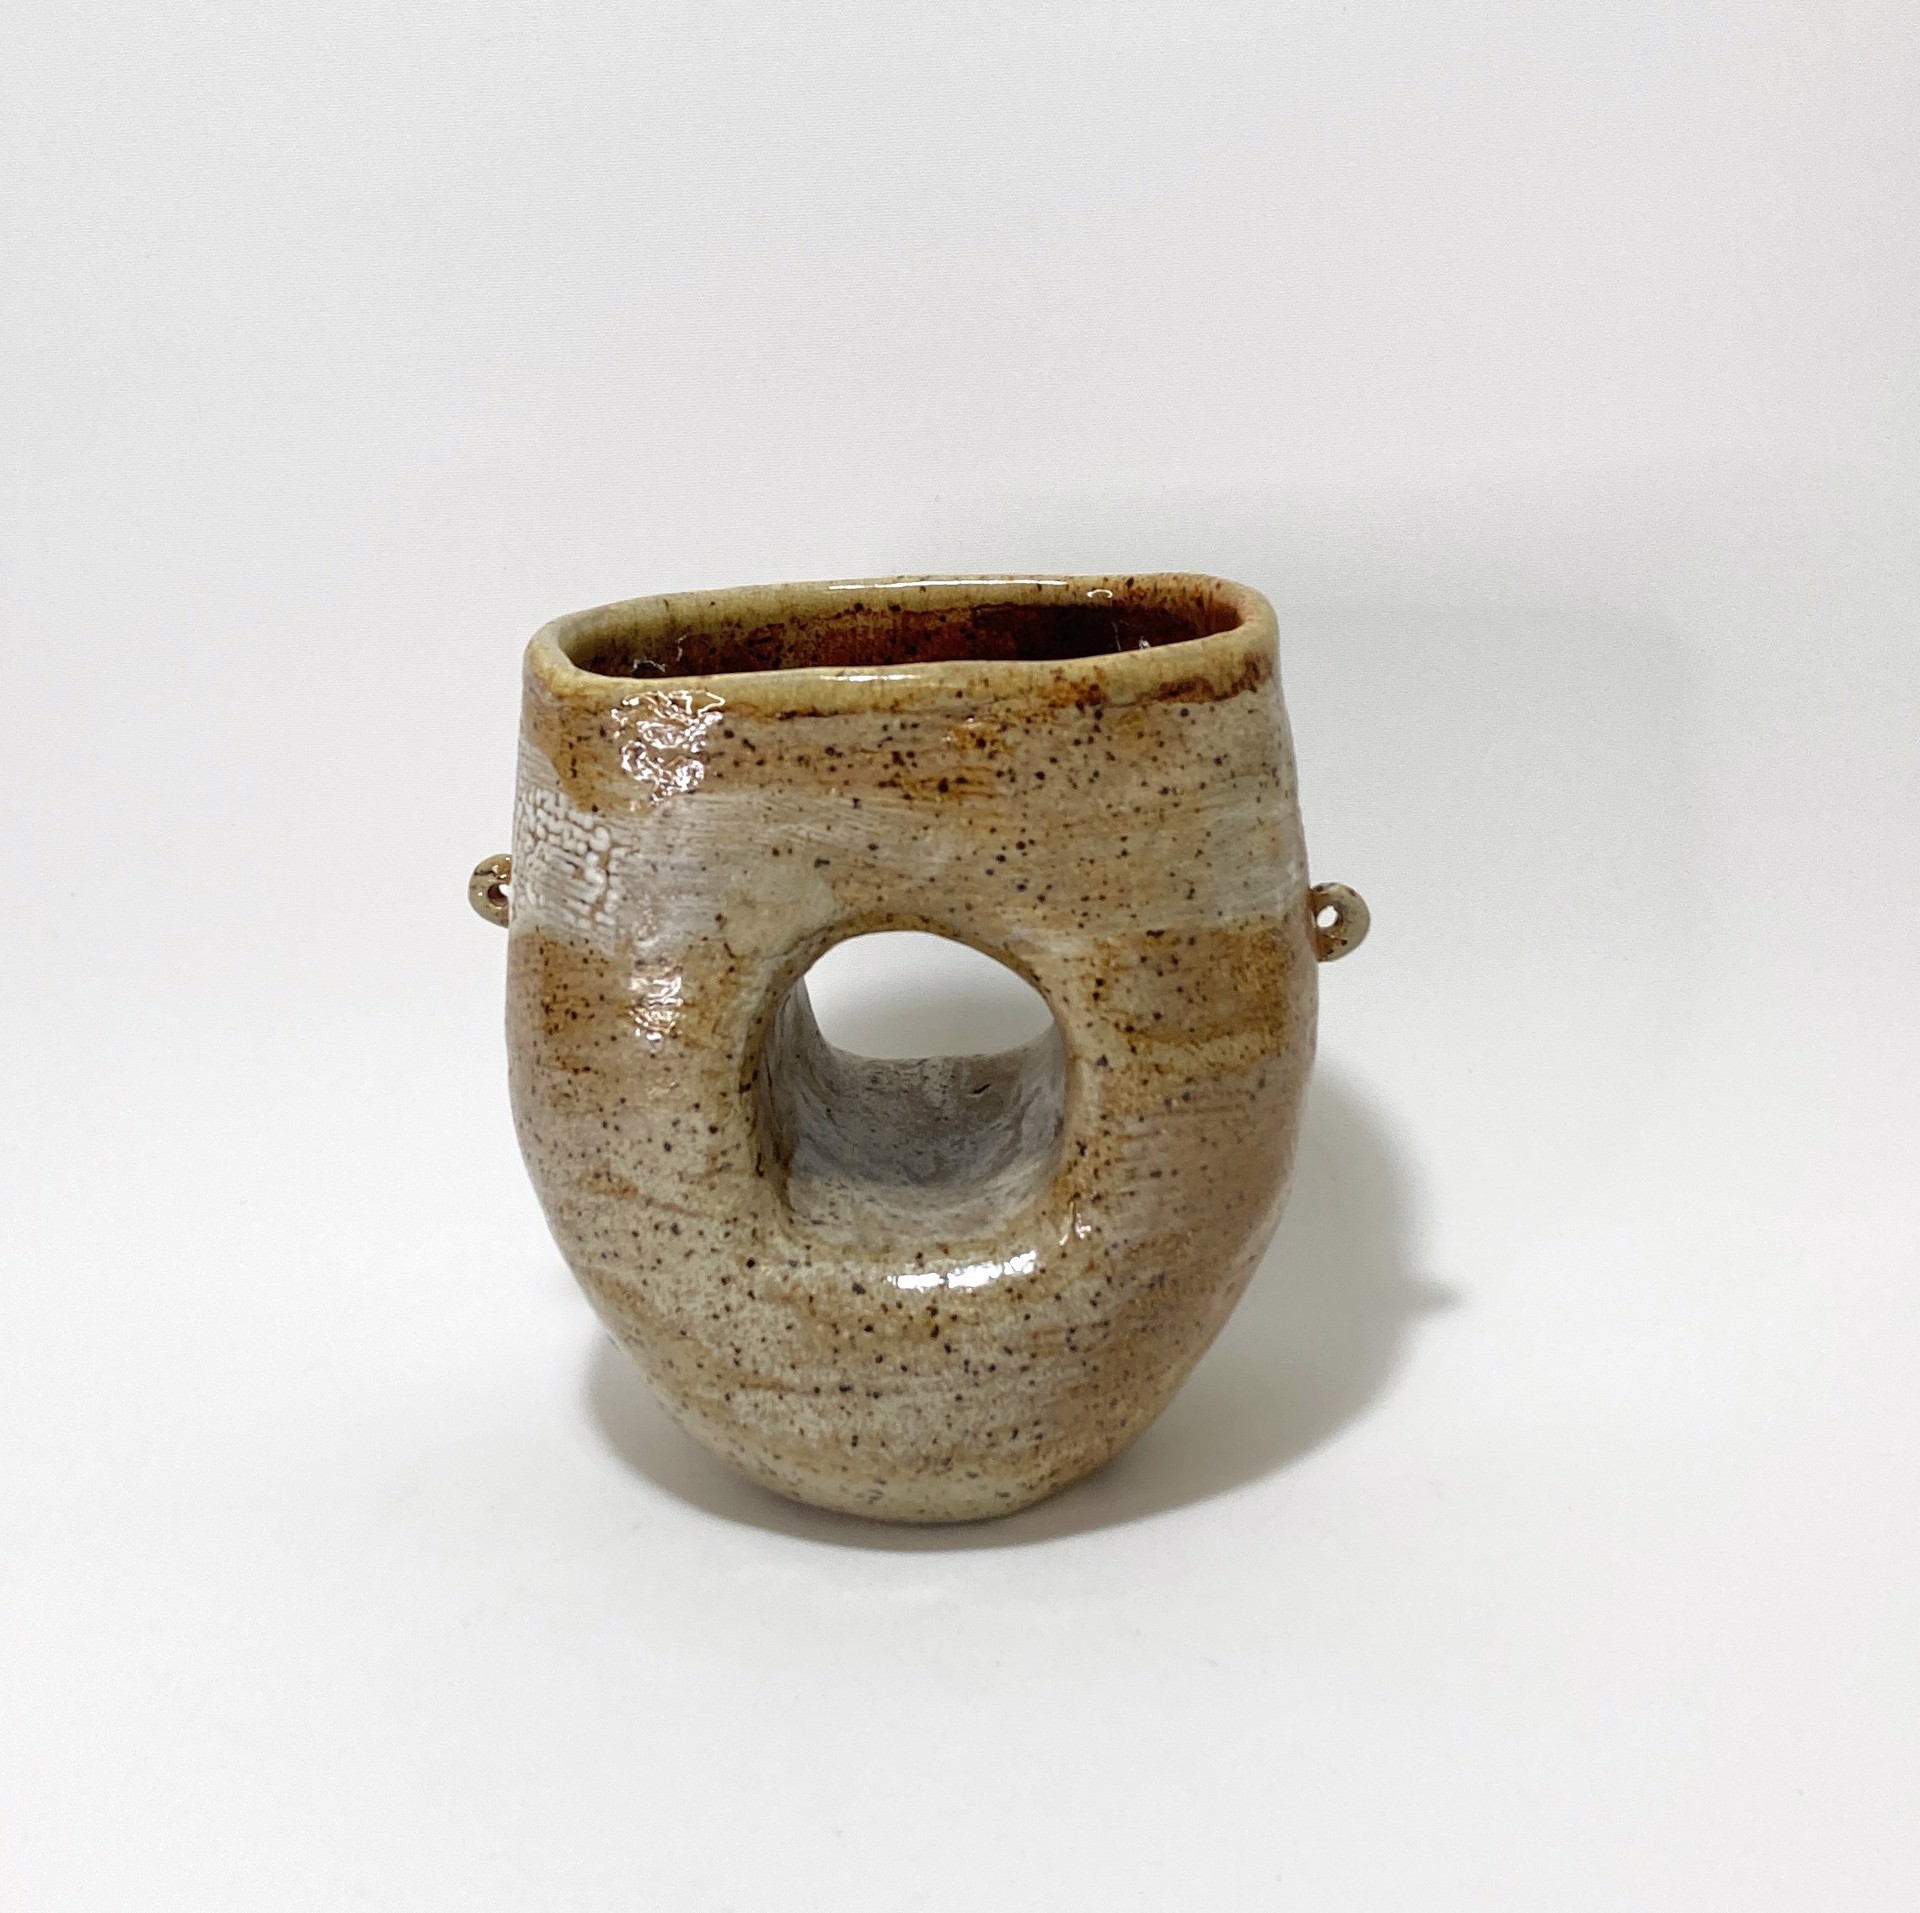 Lacuna Pot with 2 Lugs by Mary Delmege